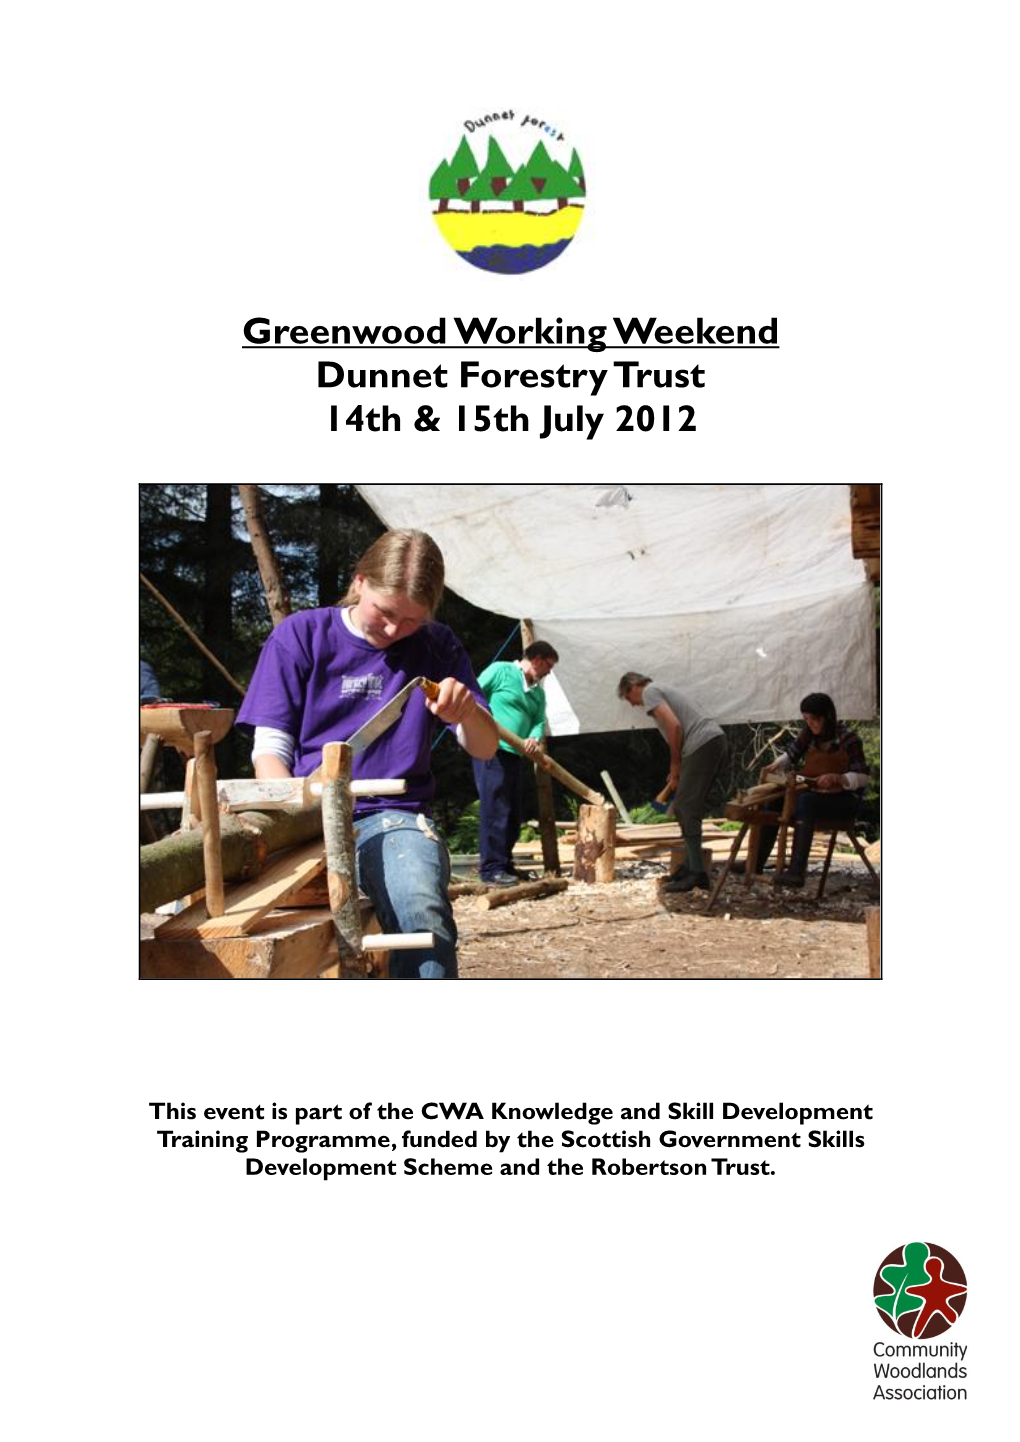 Greenwood Working Weekend Dunnet Forestry Trust 14Th & 15Th